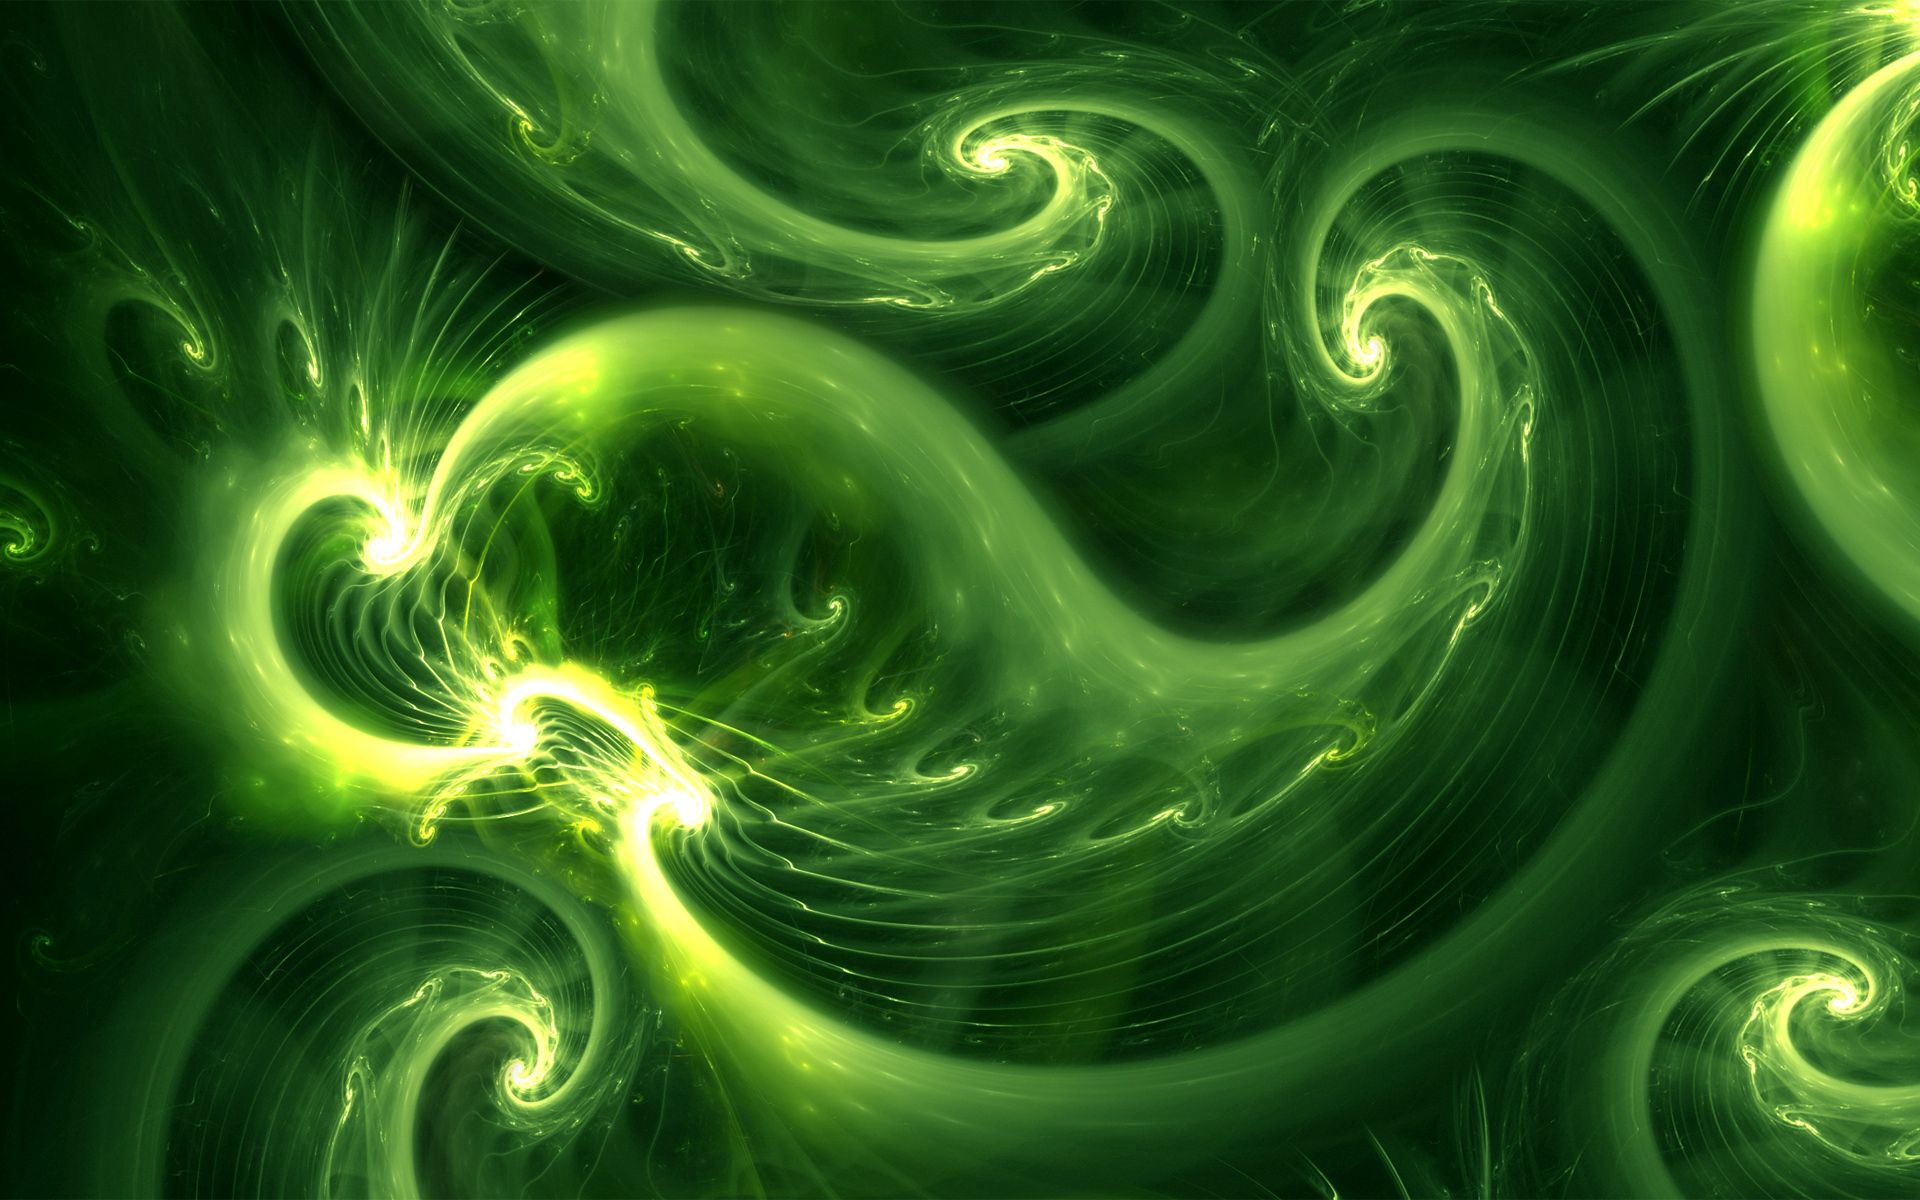 149108 download wallpaper green, abstract, smoke, form, figure screensavers and pictures for free